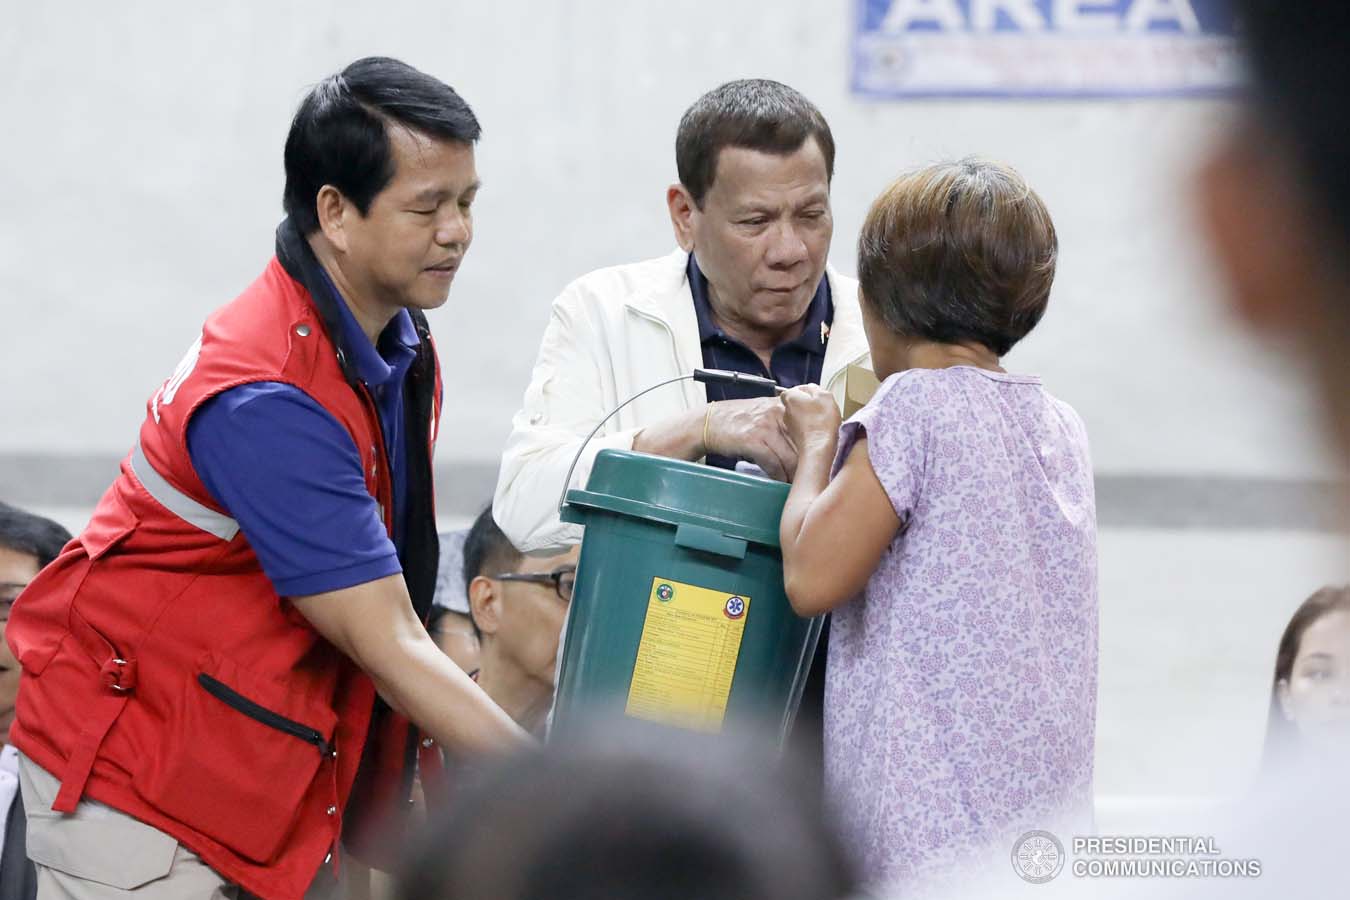 President Rodrigo Roa Duterte leads the distribution of family food packs to the victims affected by the Taal Volcano eruption during his visit at the Batangas City Sports Coliseum on January 14, 2020. TOTO LOZANO/PRESIDENTIAL PHOTO